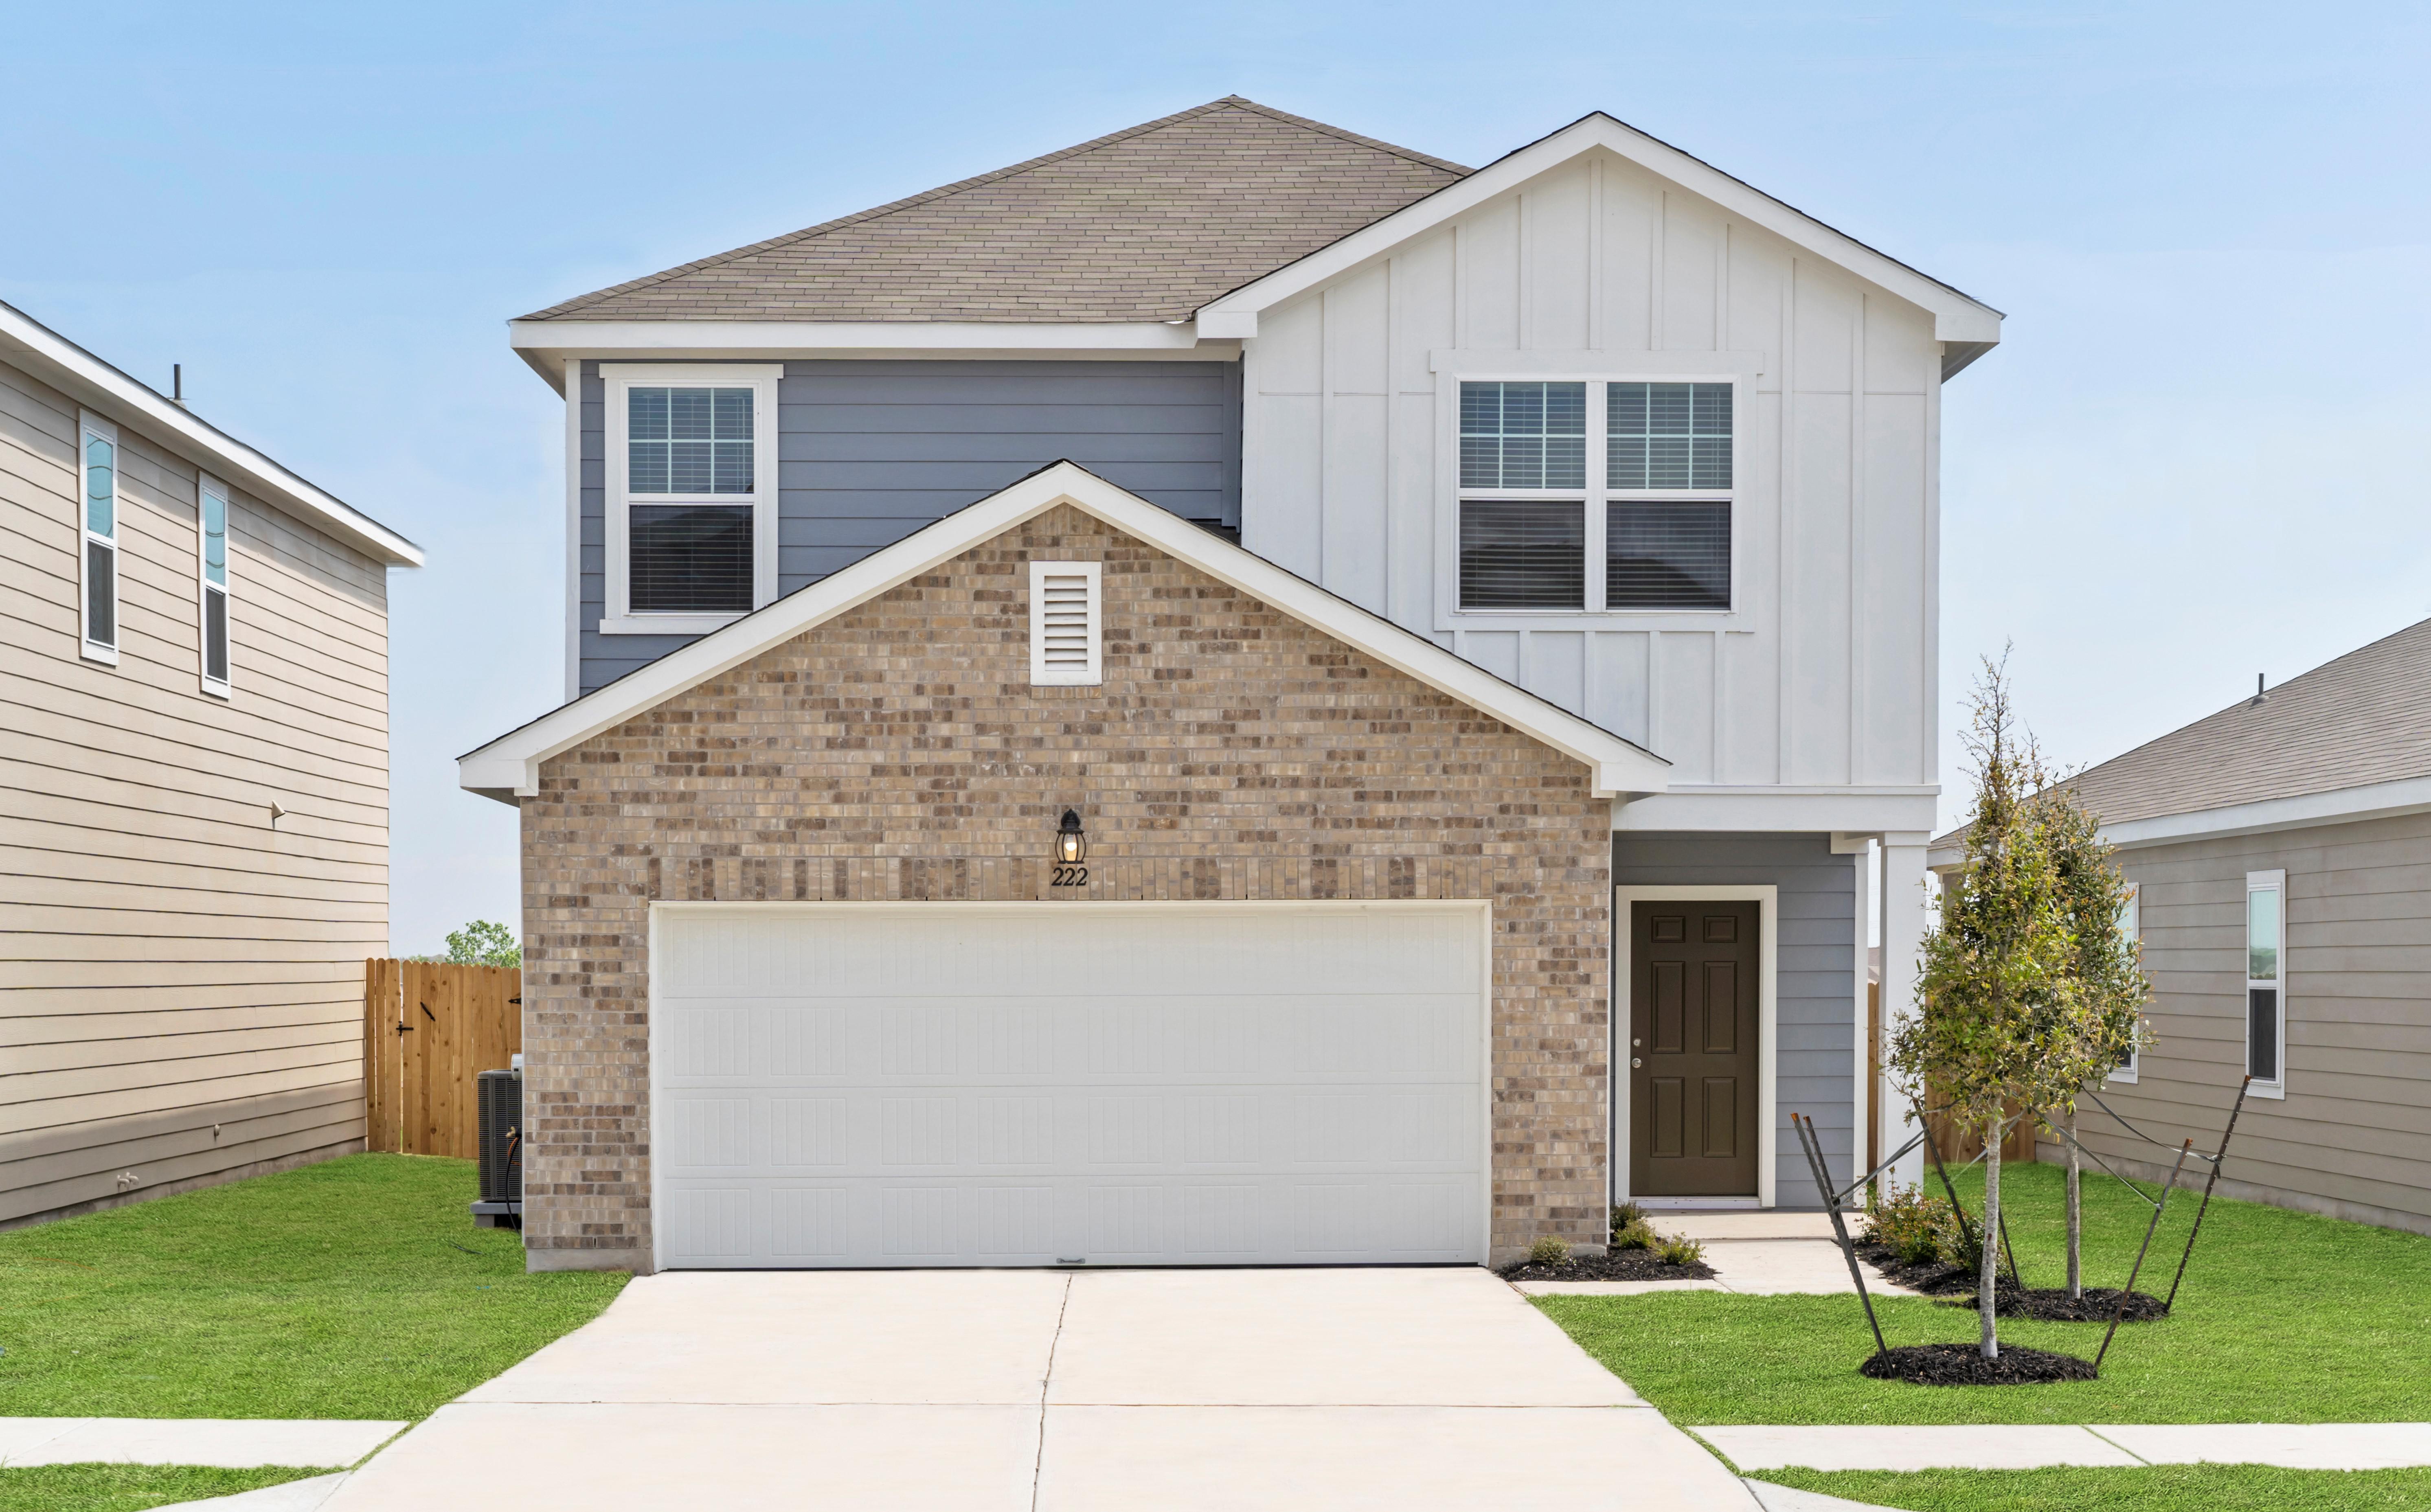 Check out our Magellan plan in our Seguin neighborhood, Cordova Trails!